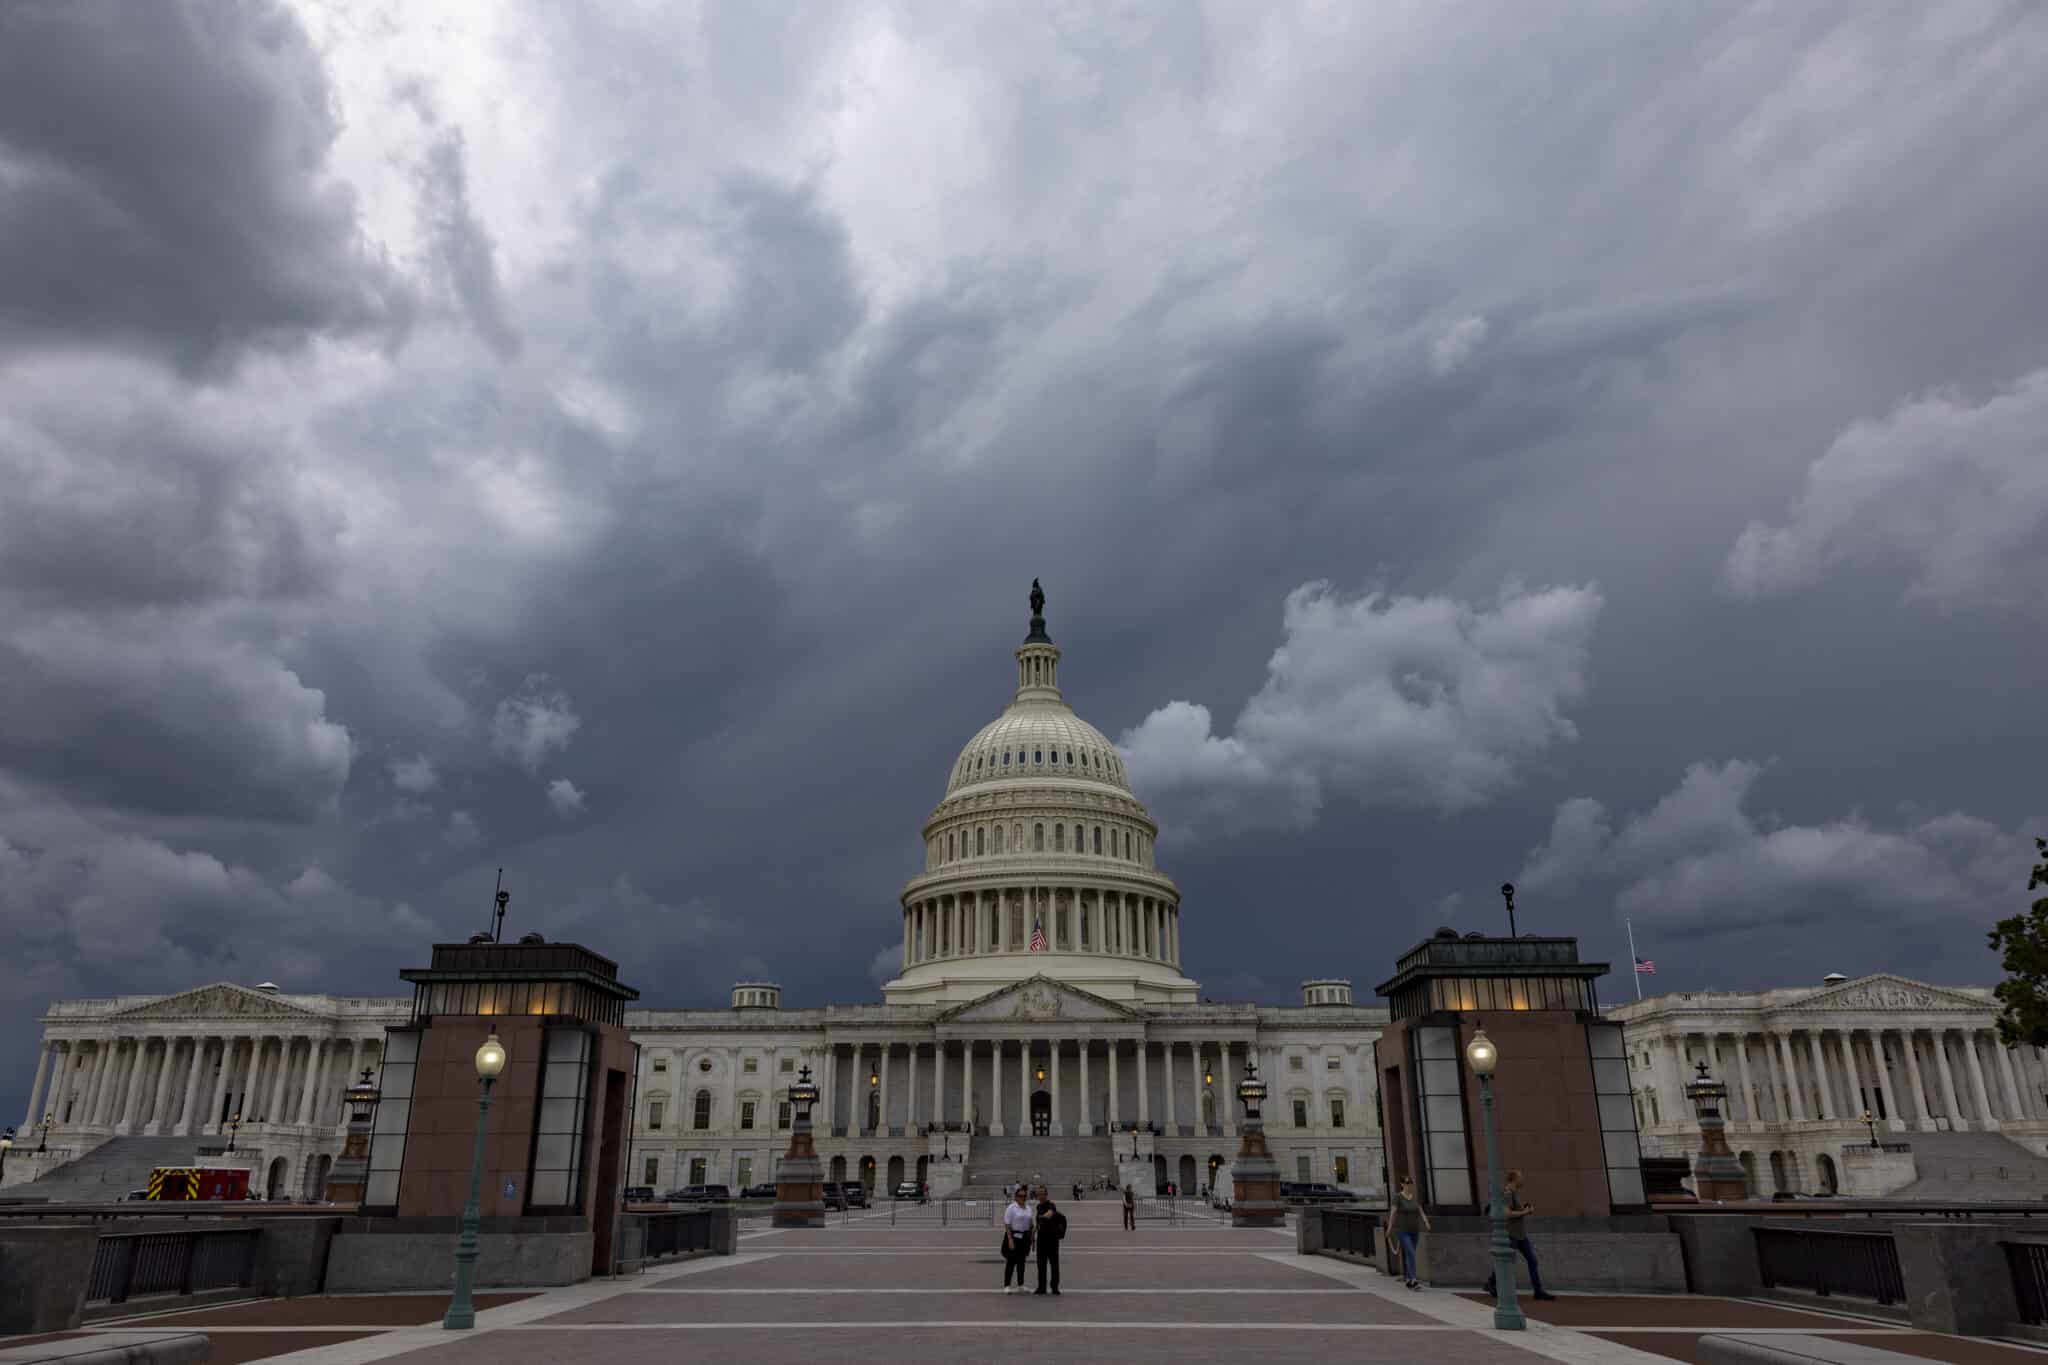 WASHINGTON, DC - MAY 16: A storm cloud hangs over the U.S. Capitol Building on May 16, 2022 in Washington, DC. This week the U.S. Senate is expected to take up a vote on a $40 billion package of military and humanitarian aid to Ukraine. (Photo by Anna Moneymaker/Getty Images)